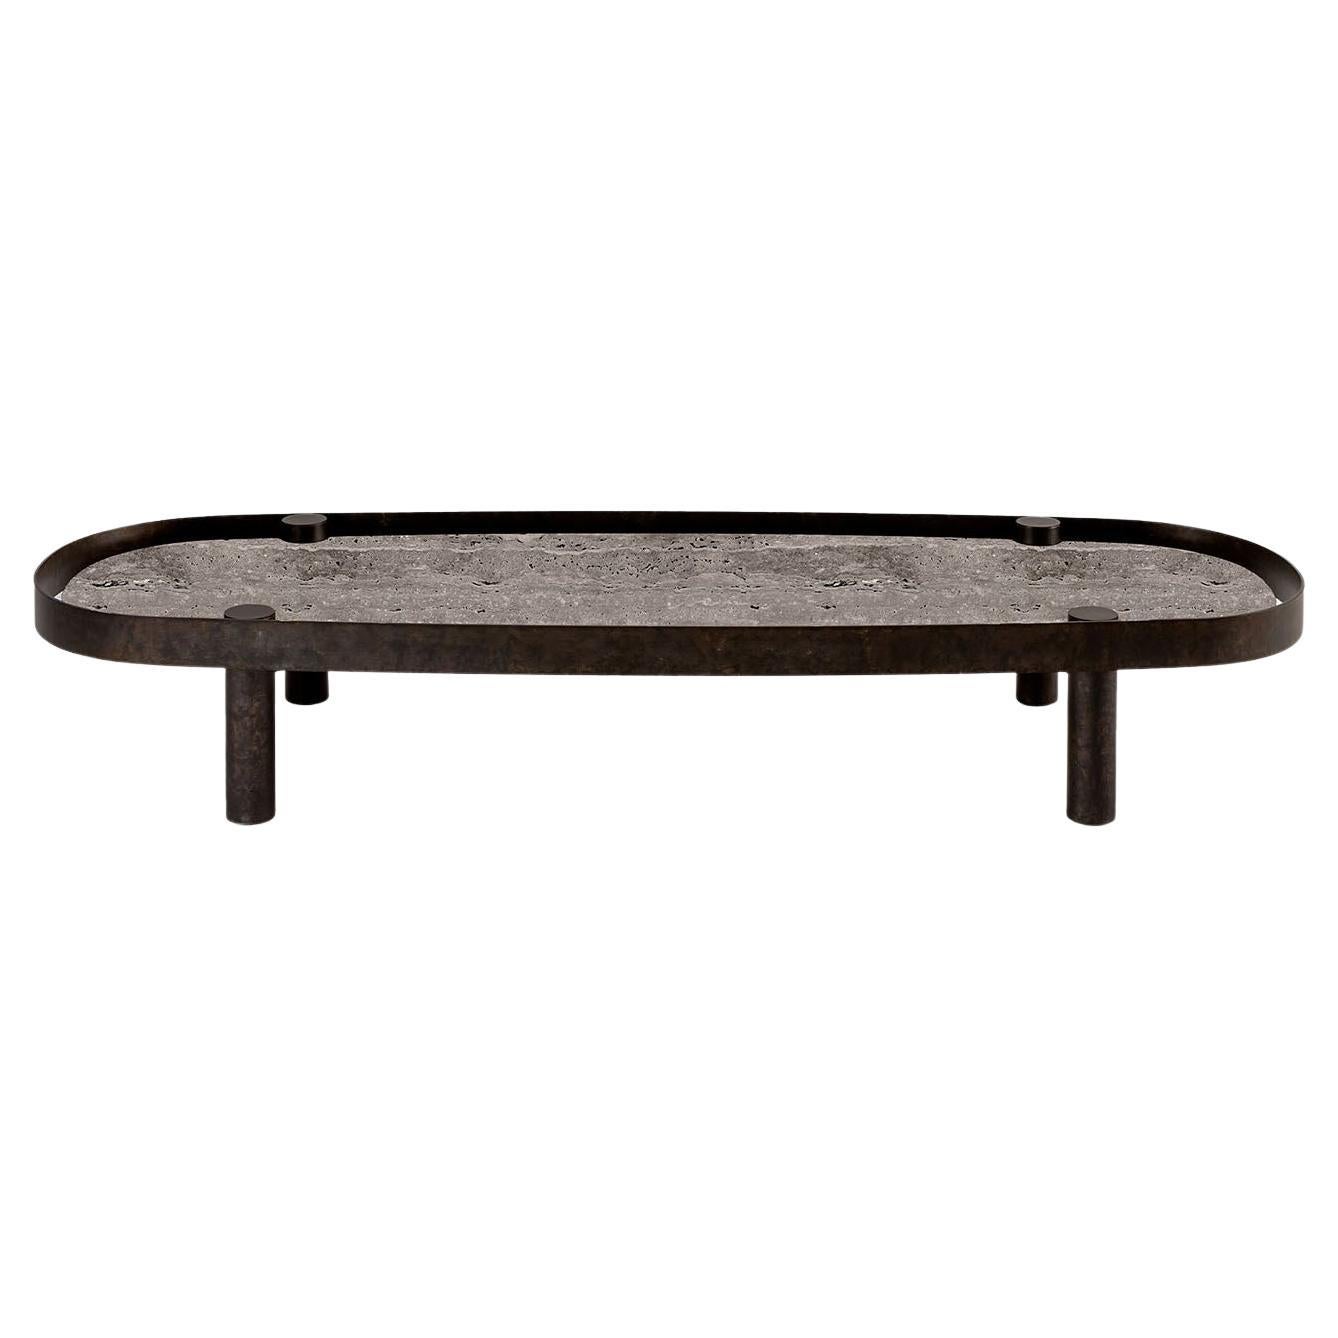 "Tray" Low Travertino Marble Coffe Table For Sale